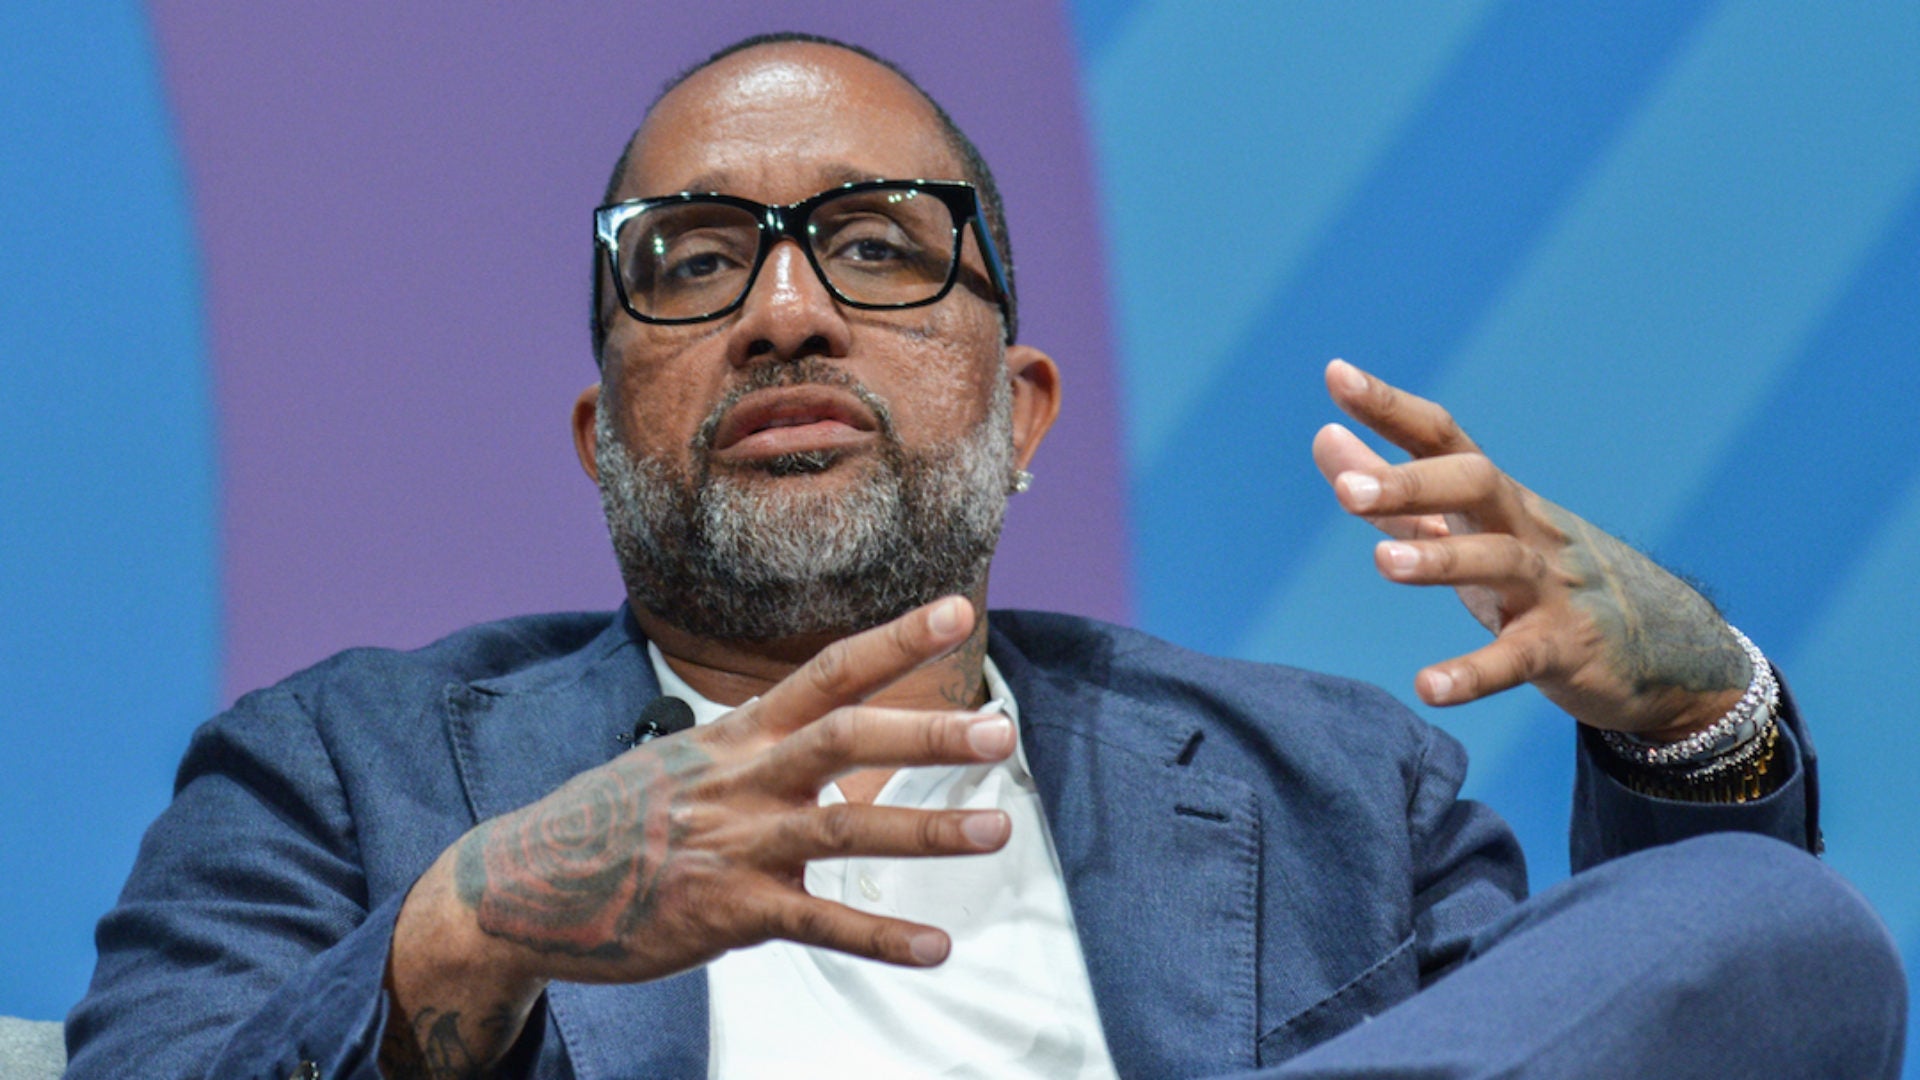 Kenya Barris Responds to Critics Who Slammed 'Black Excellence' Casting: 'These Kids Look Like My Kids'